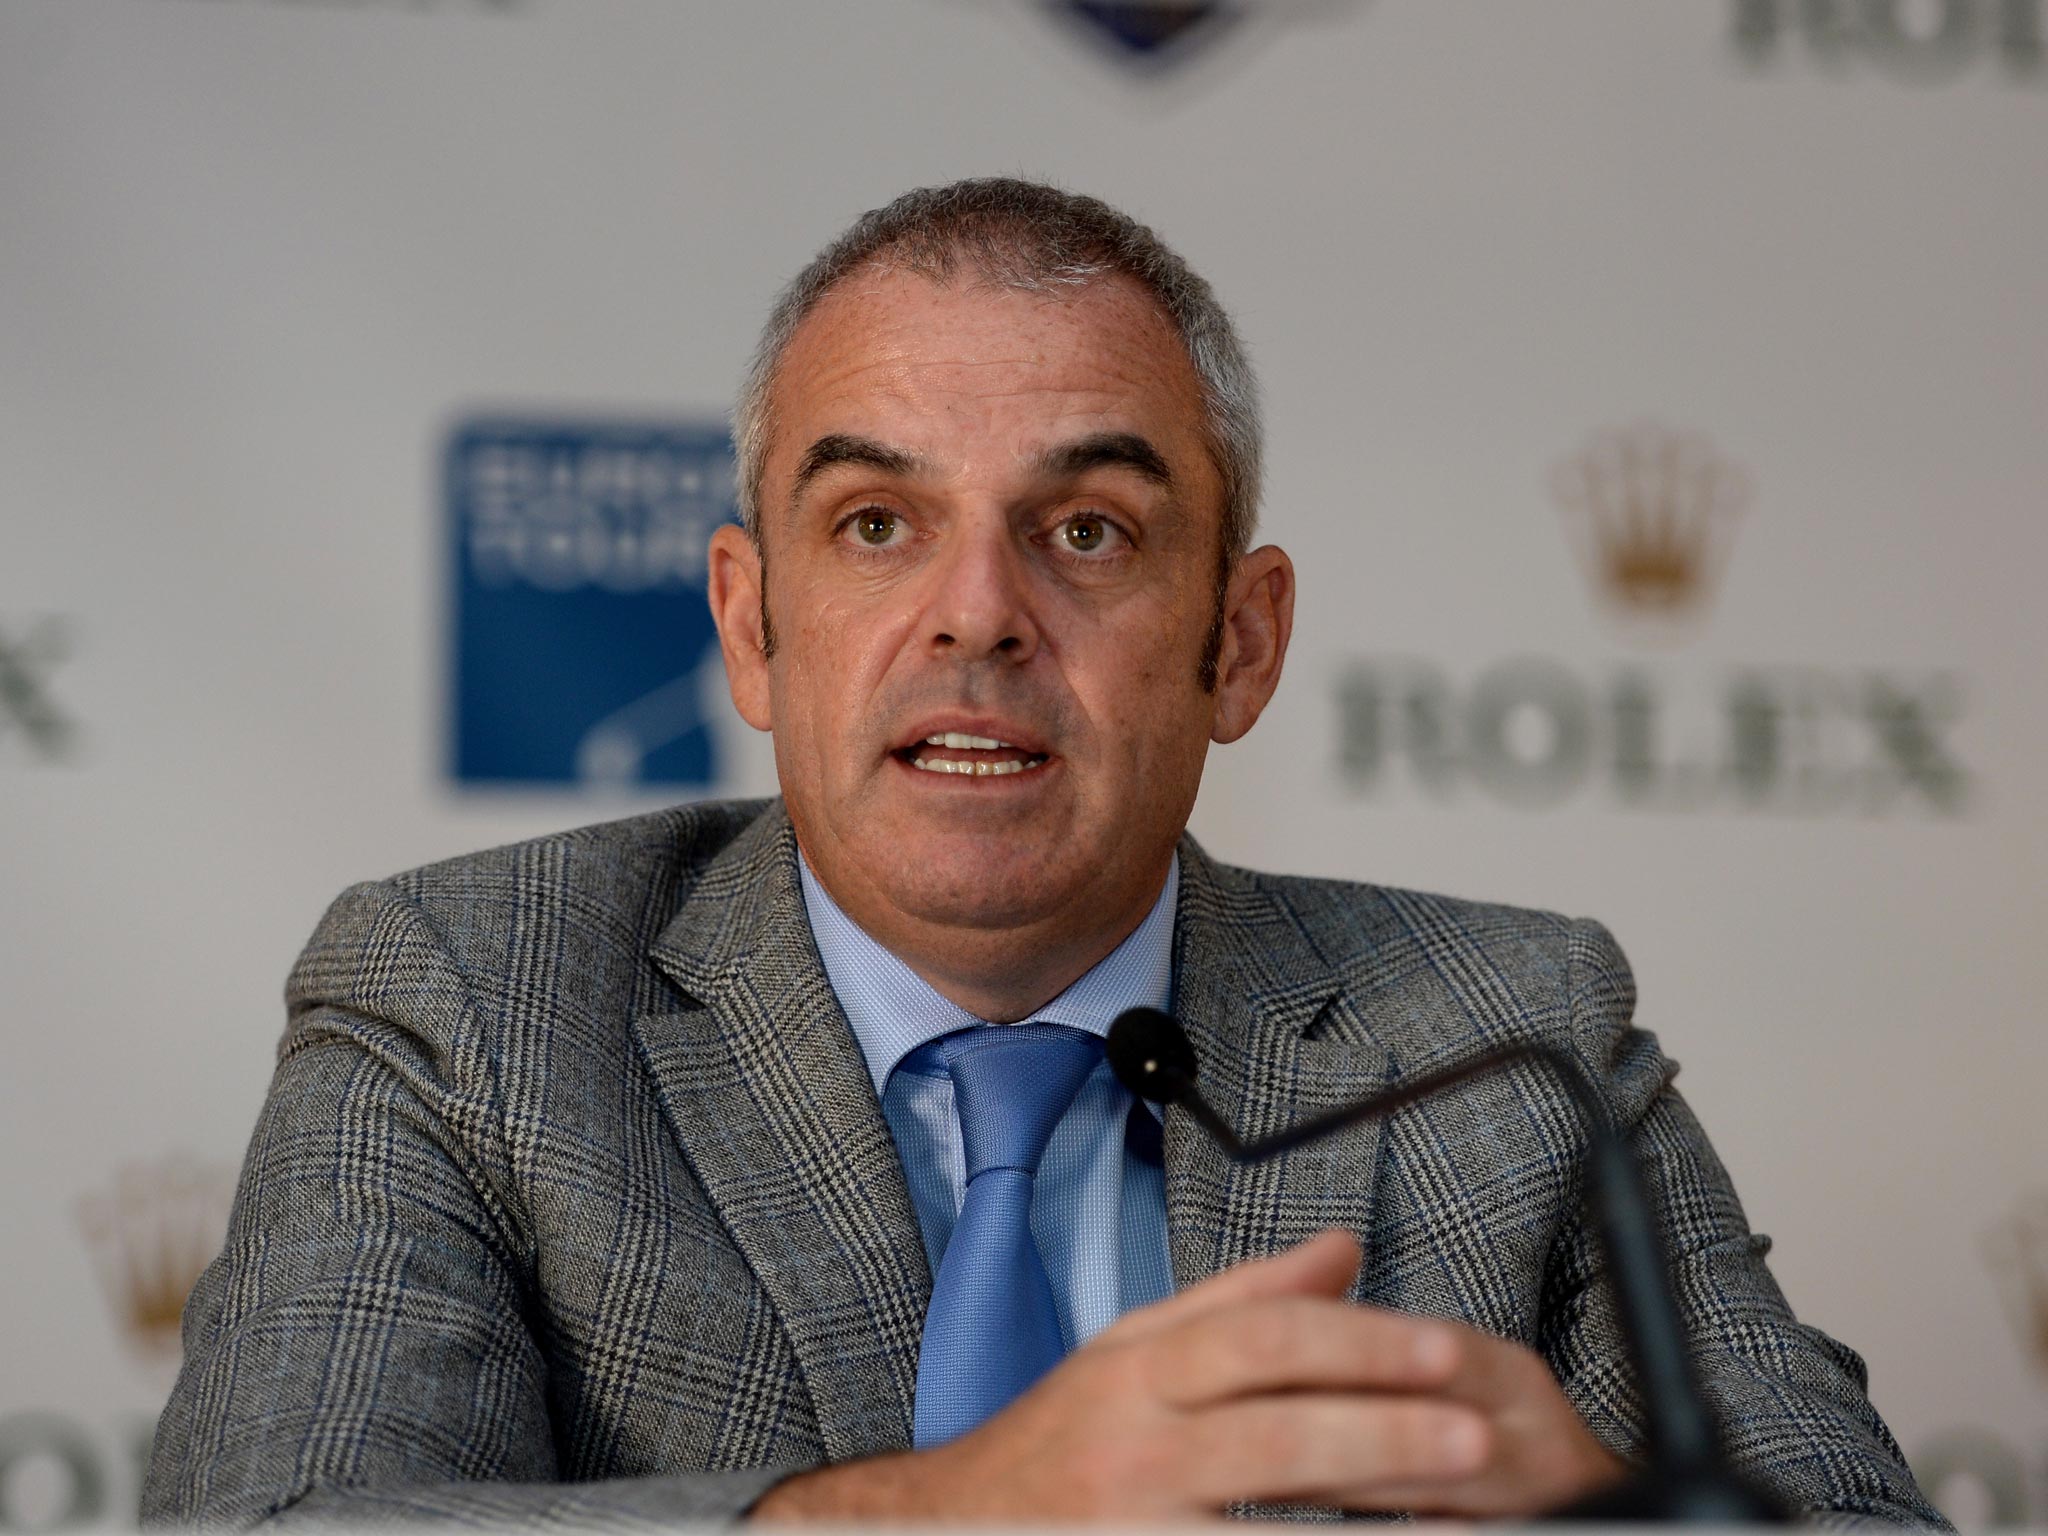 Europe Ryder Cup captain Paul McGinley has appointed Sam Torrence and Des Smyth as two of his four vice-captains